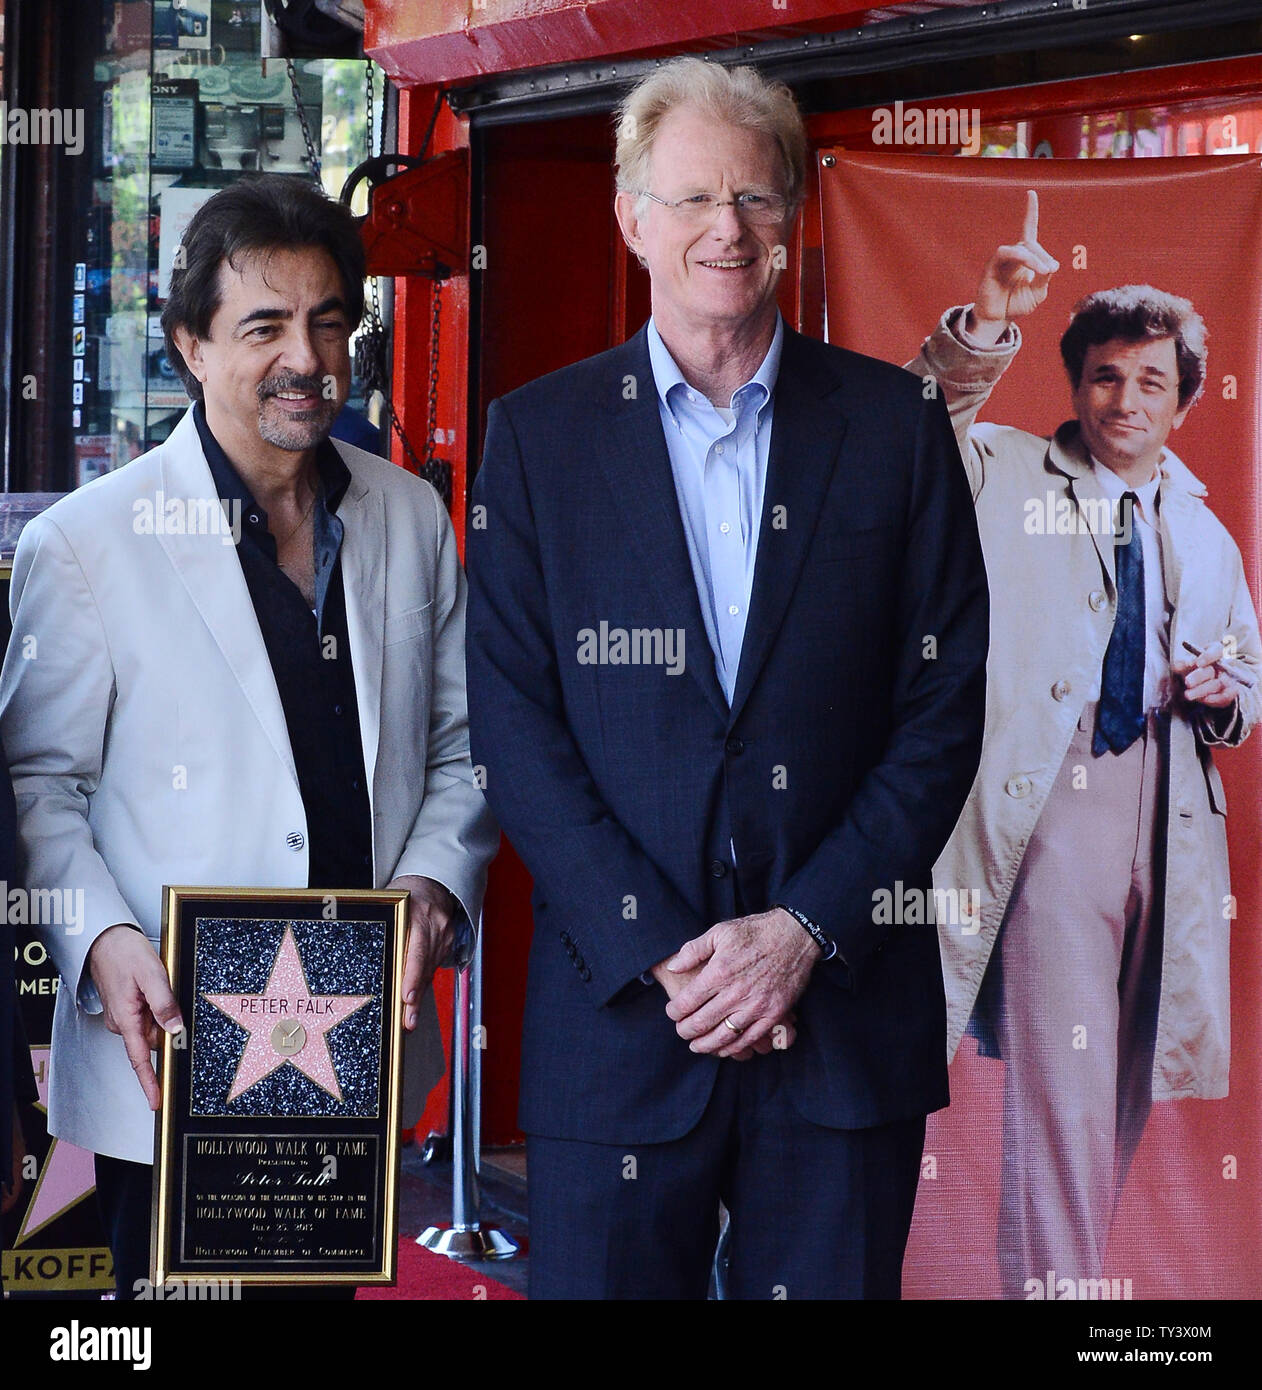 Actors Joe Mantegna (L) and Ed Begley Jr. attend the posthumous ceremony honoring the late actor Peter Falk with the 2,503rd star on the Hollywood Walk of Fame in Los Angeles on July 25, 2013. Falk, most famous for his role in the television series 'Colombo' died at the age of 83 on June 23, 2011 at his home in California.UPI/Jim Ruymen Stock Photo